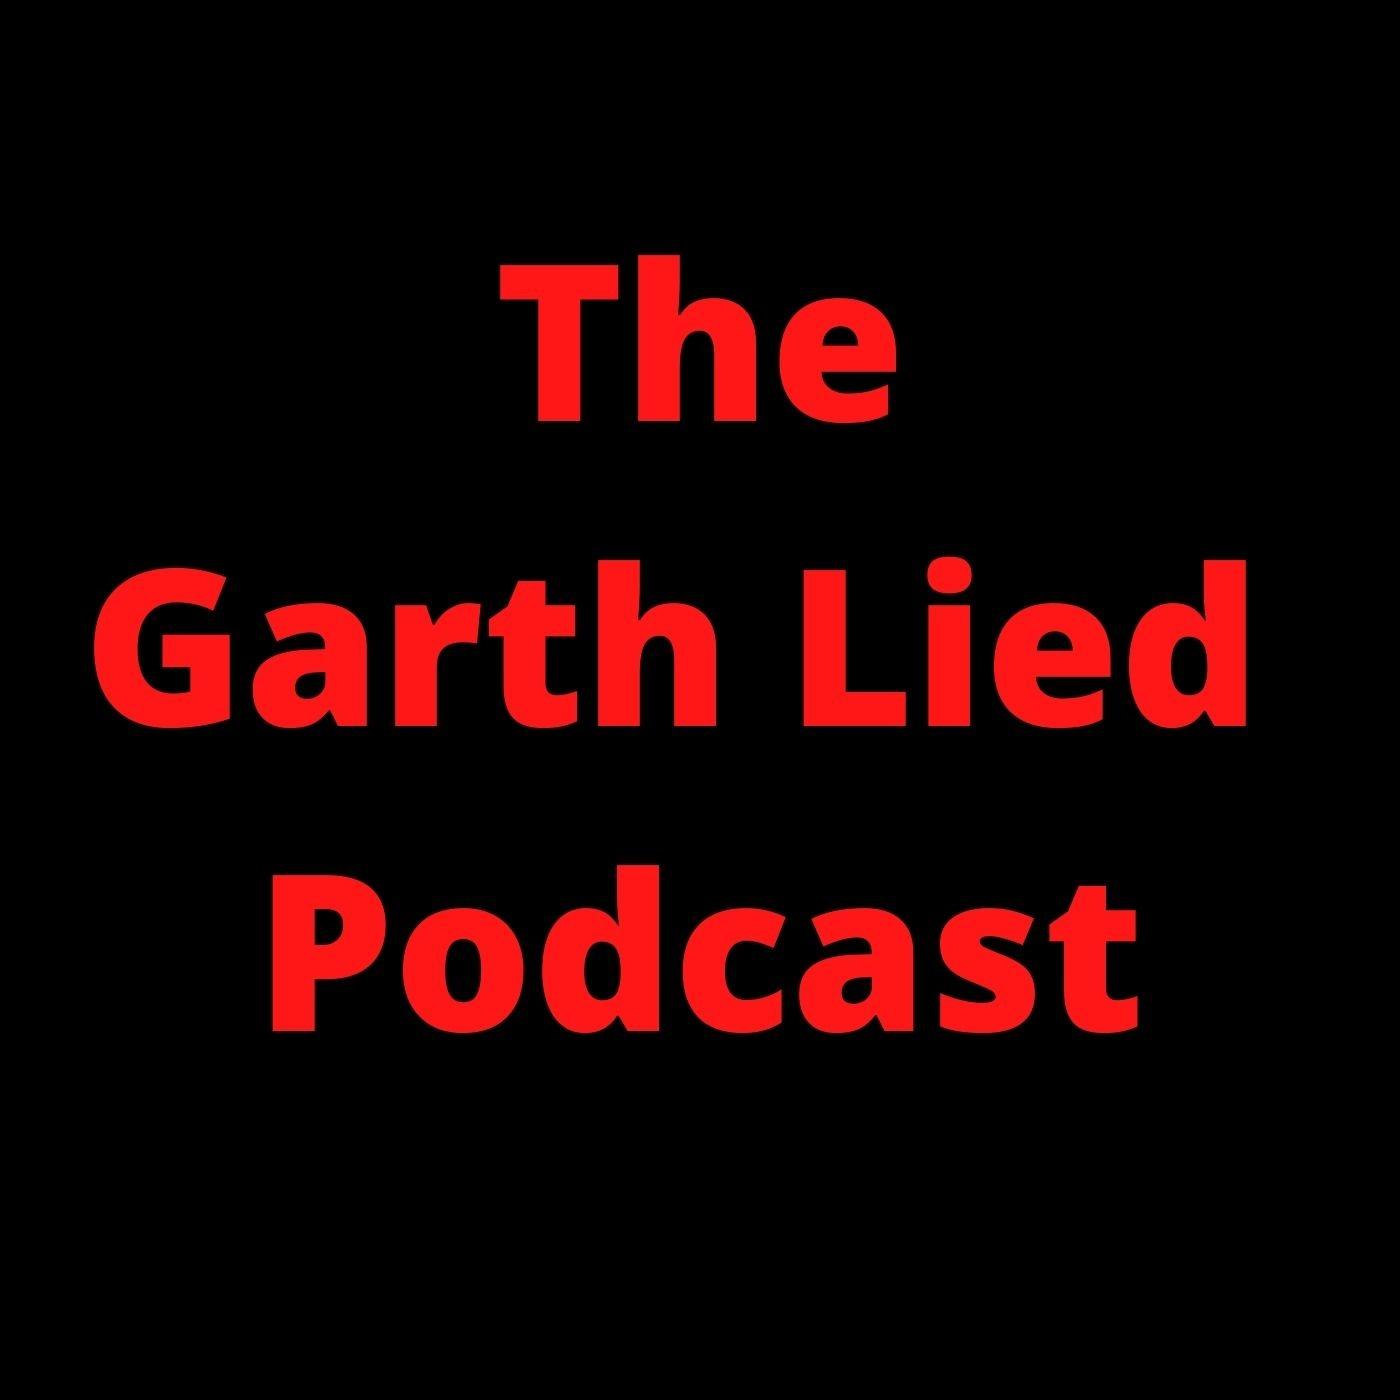 The Garth Lied Podcast